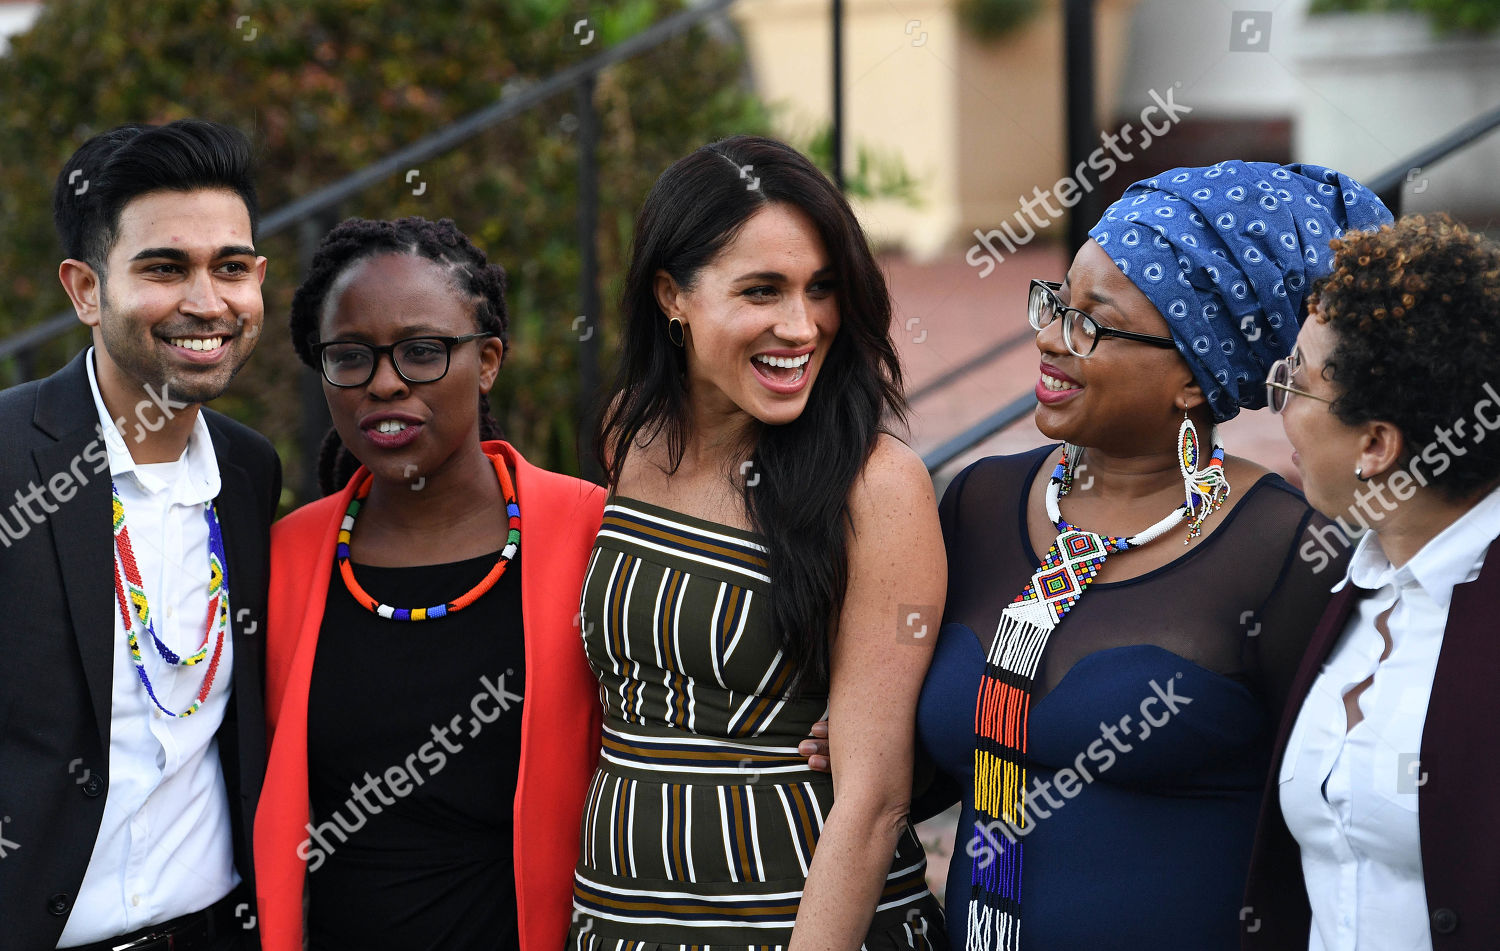 prince-harry-and-meghan-duchess-of-sussex-visit-to-africa-shutterstock-editorial-10422975v.jpg